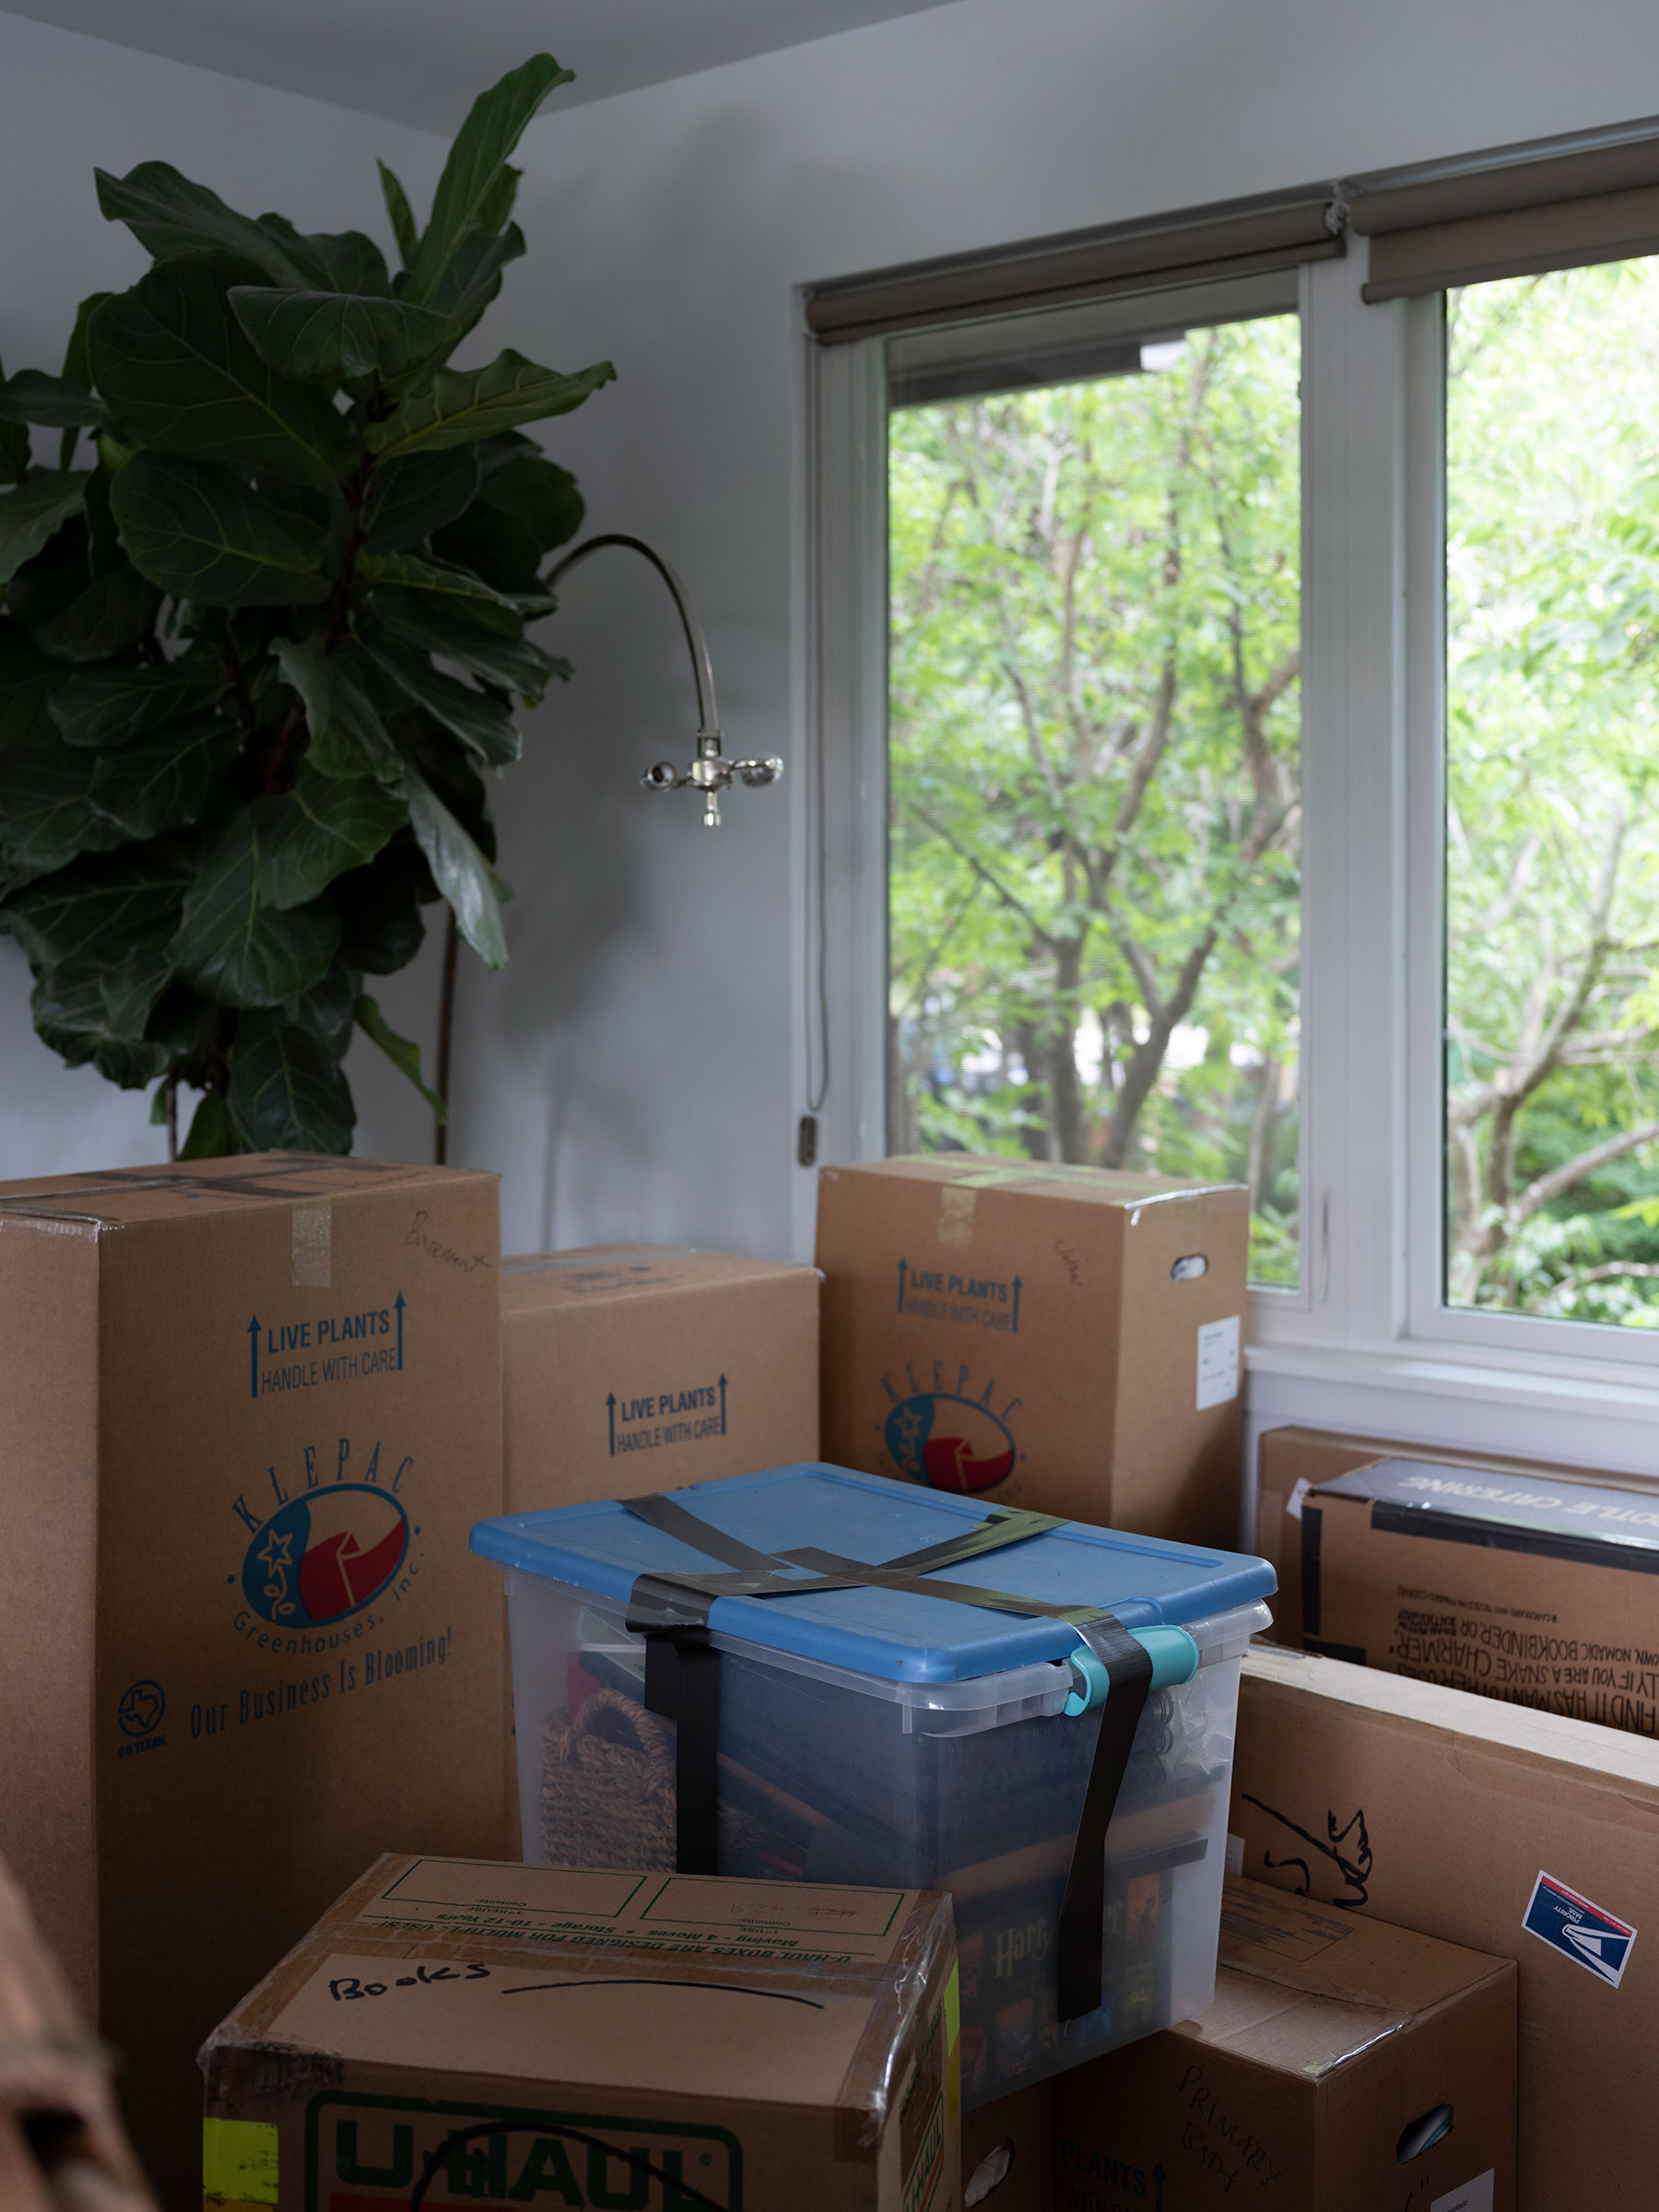 Boxes wait to be taken by the movers as Karen's family prepares to leave Austin. (riel Sturchio for TIME)